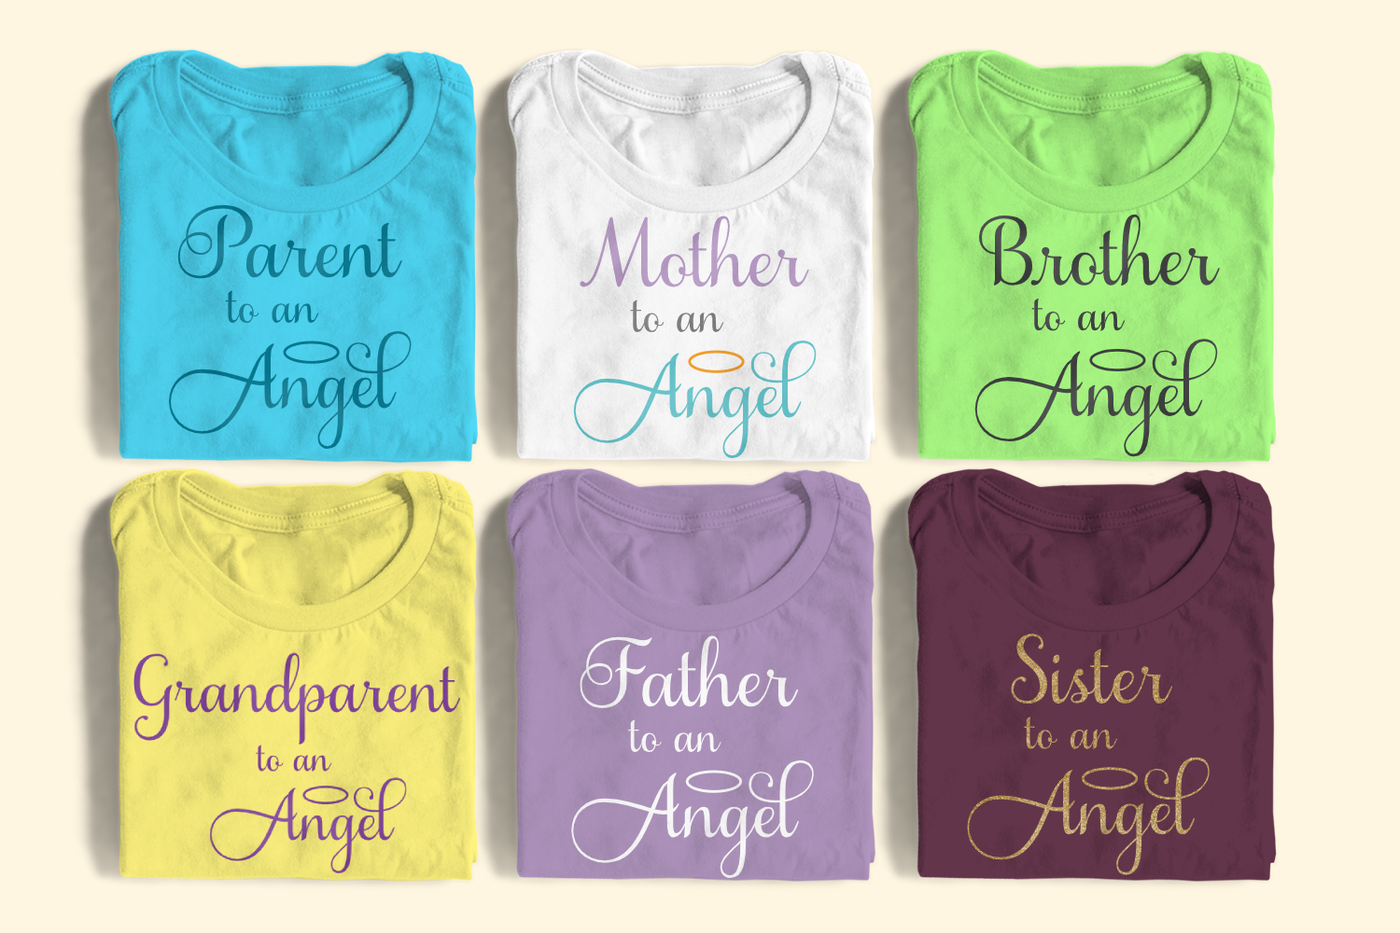 Six folded tees. They say" Parent to an Angel, Mother to an Angel, Brother to an Angel, Grandparent to an Angel, Father to an Angel, and Sister to an Angel.